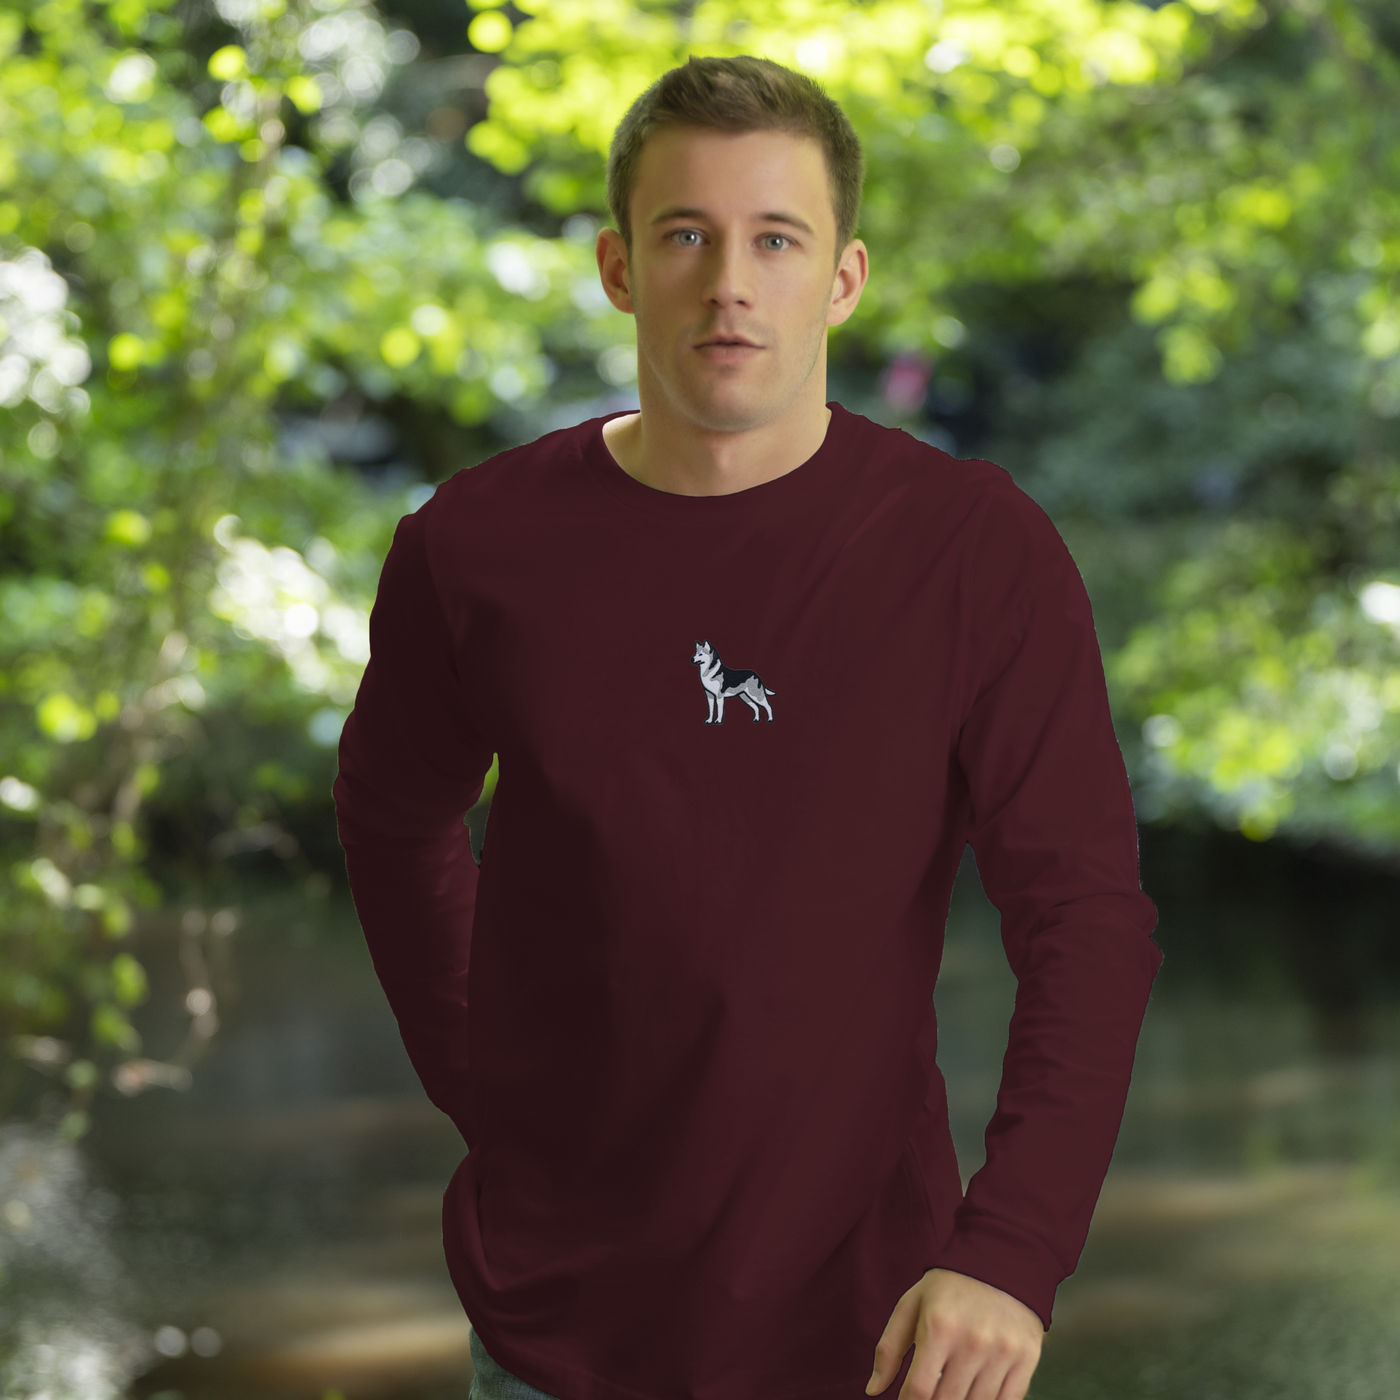 Bobby's Planet Men's Embroidered Siberian Husky Long Sleeve Shirt from Paws Dog Cat Animals Collection in Maroon Color#color_maroon